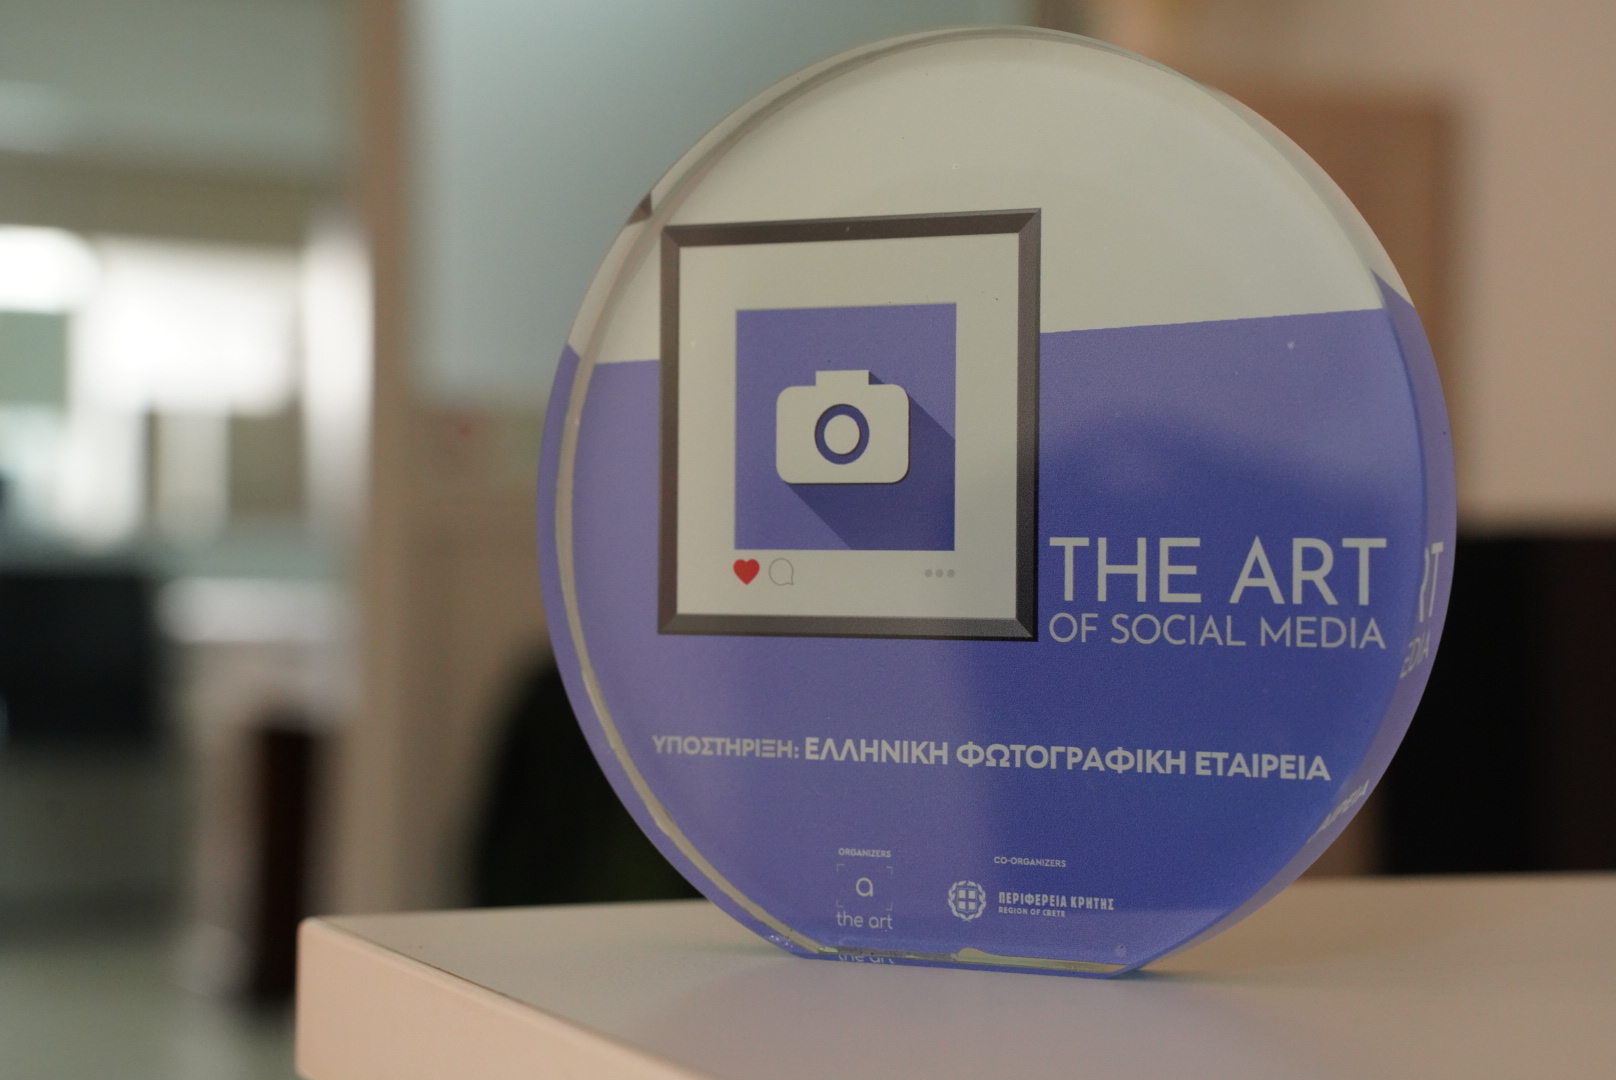 The Art of Social Media 2022 exhibition has started in Athens!